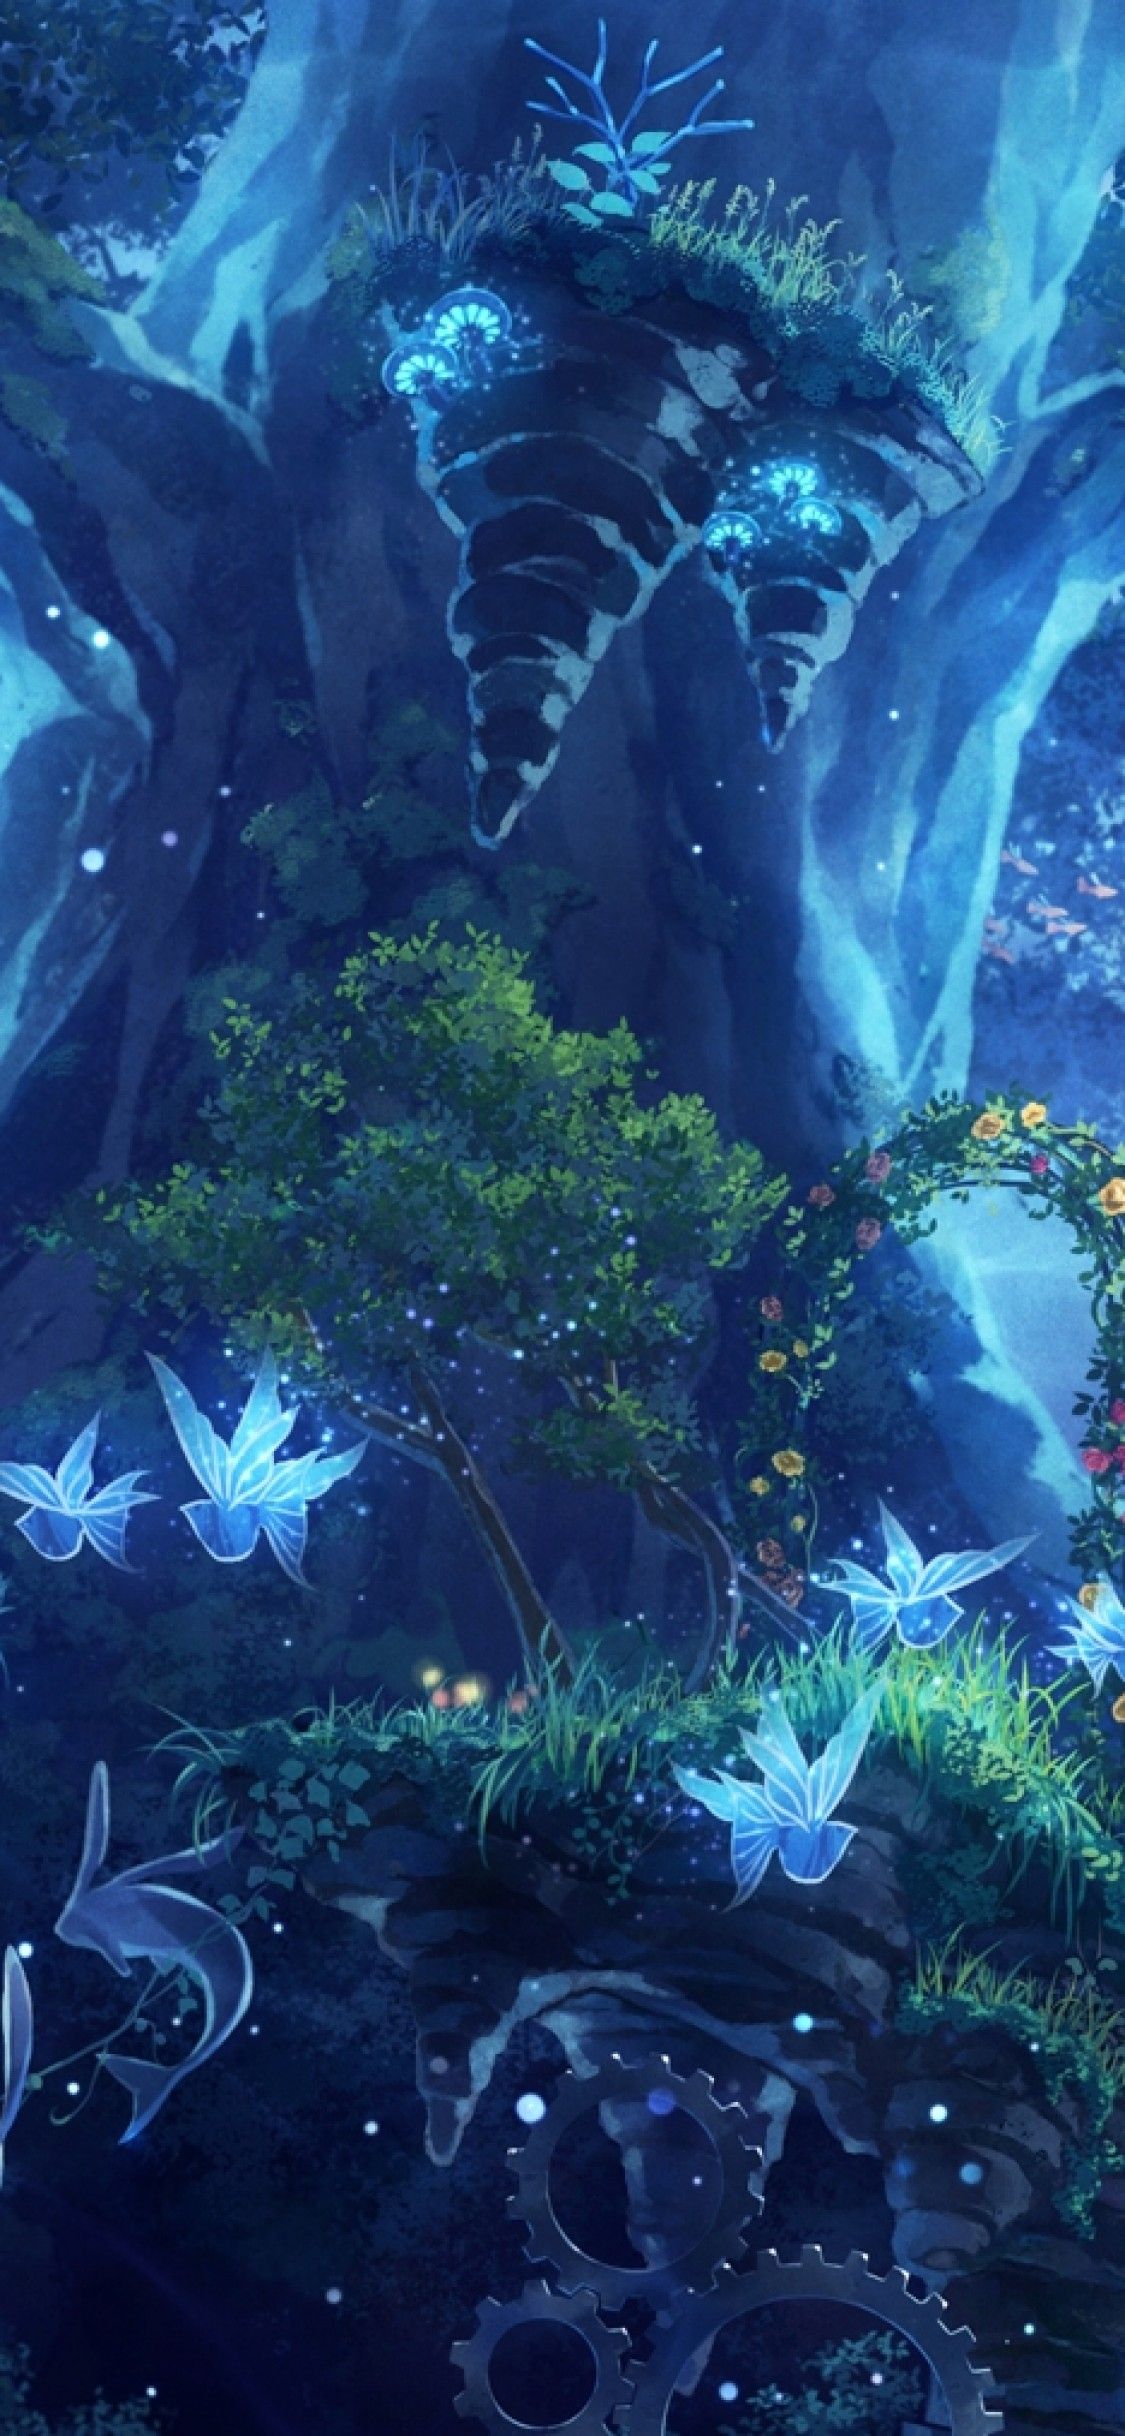 Download Anime Girl, Fairy Forest, Butterflies, Plants - Anime Fairy Forest - HD Wallpaper 